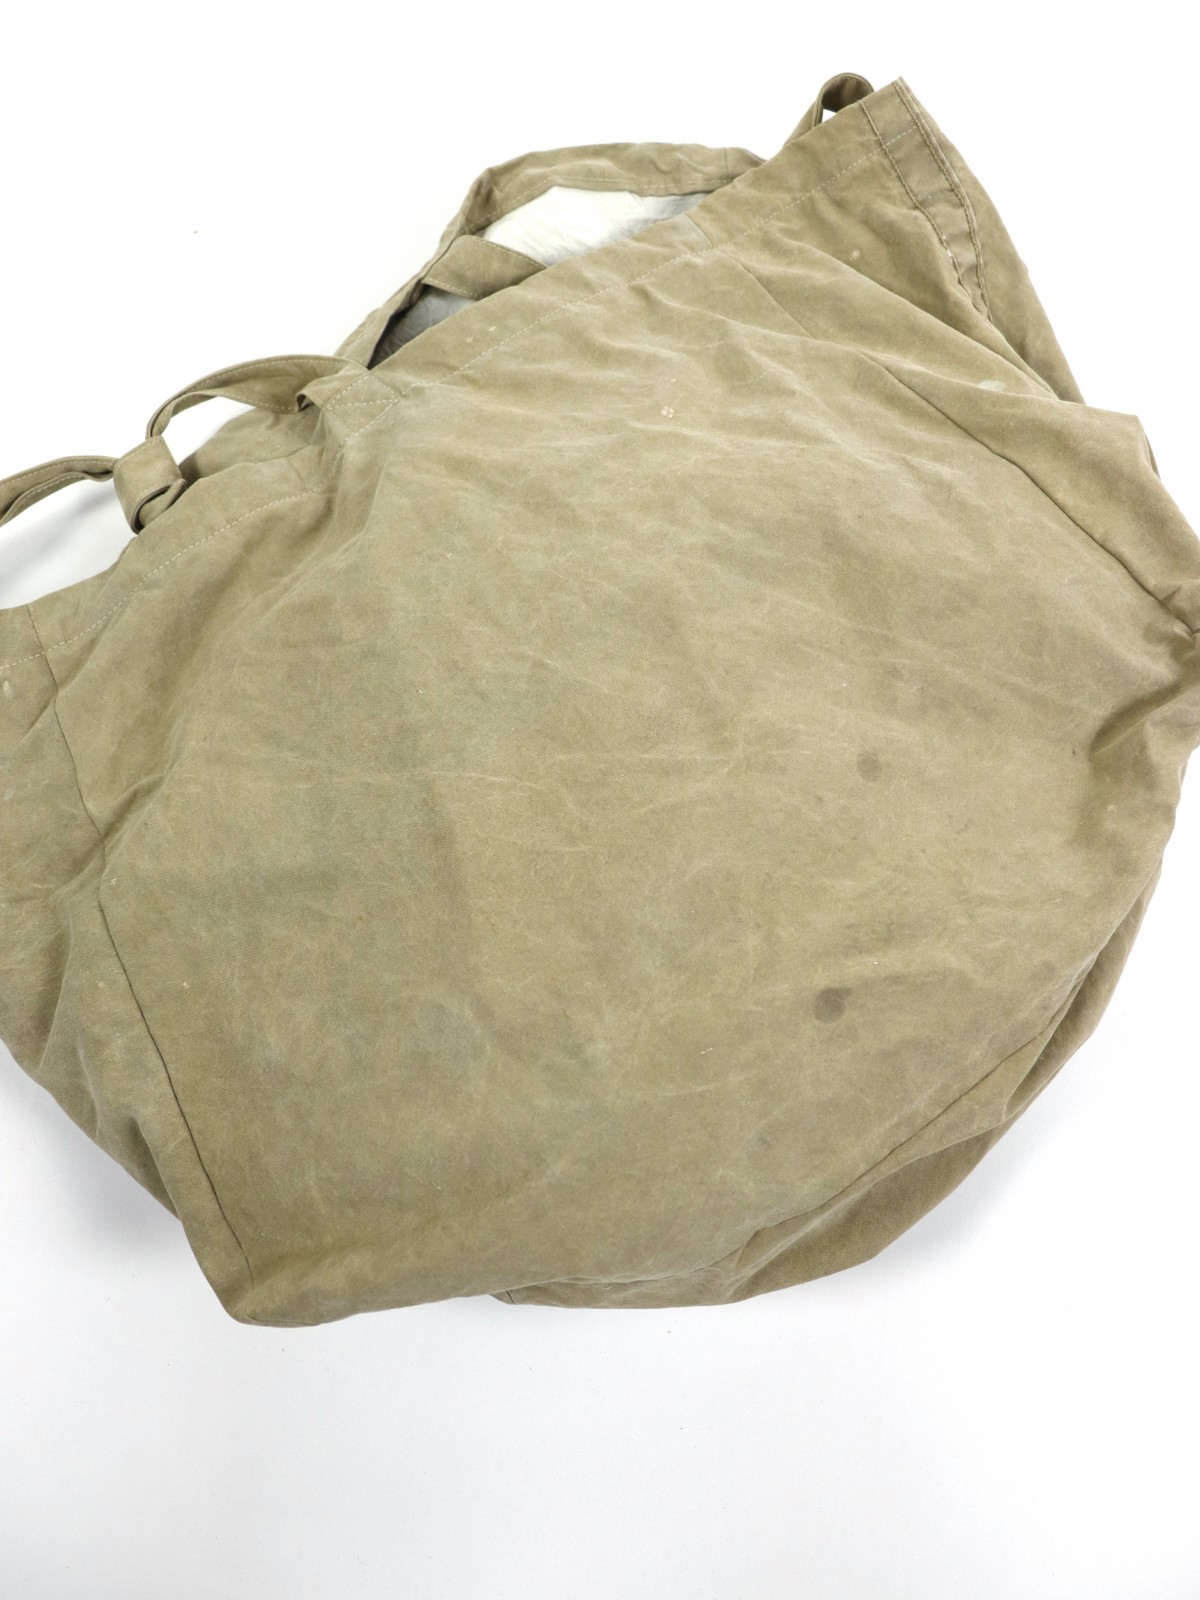 french military tent fabric,brown.remake,bag